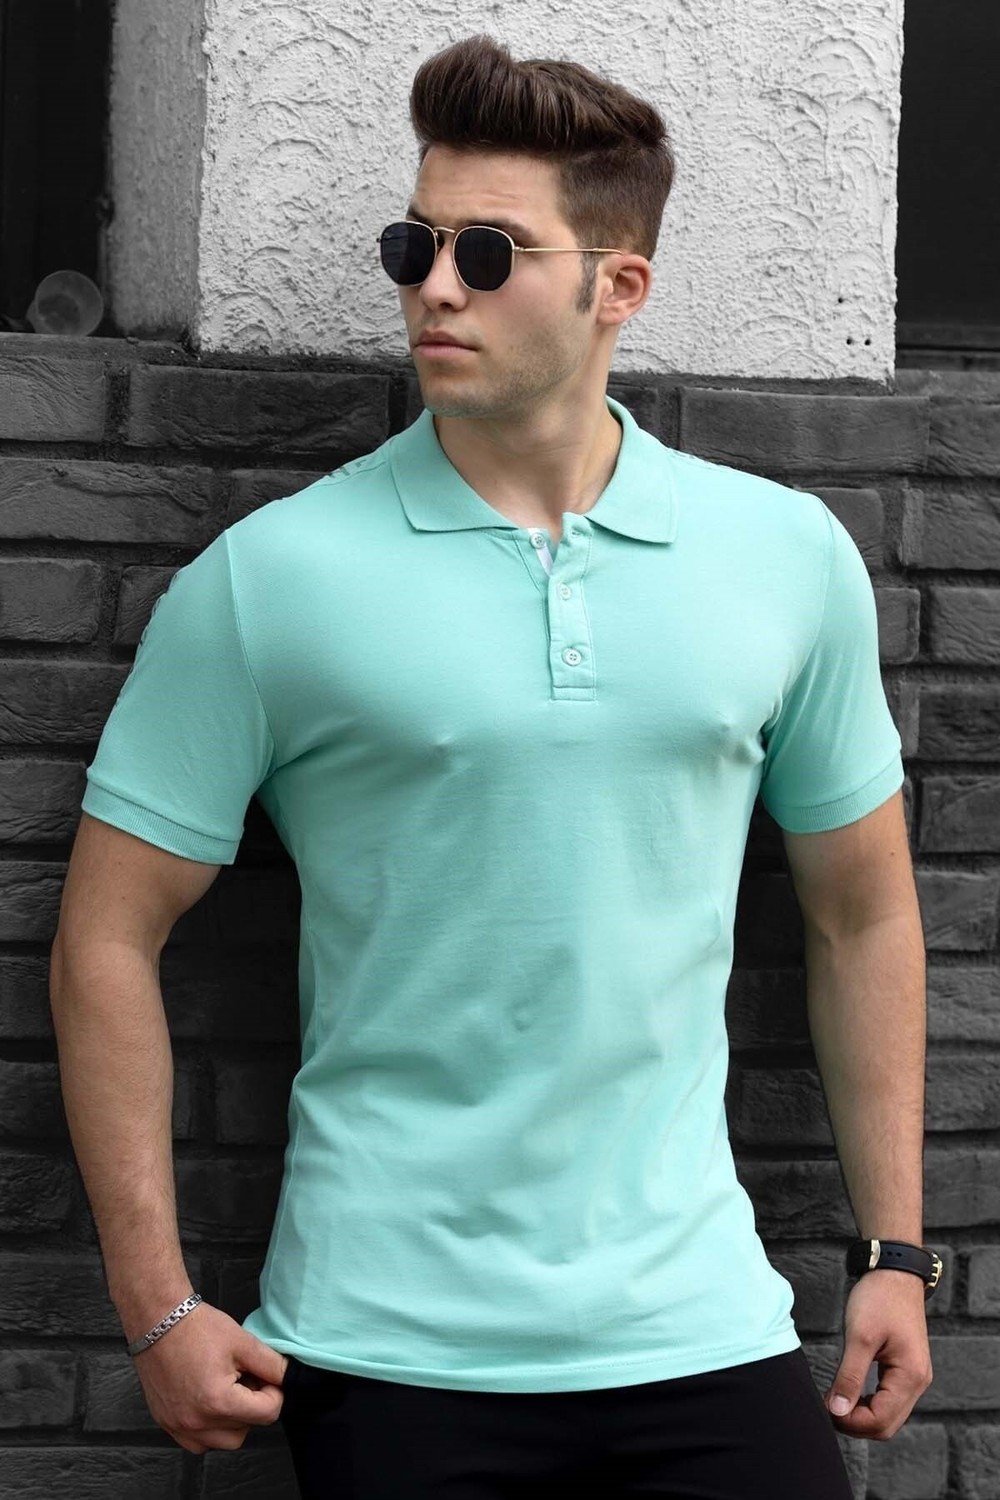 Madmext Polo T-shirt - Turquoise - Regular fit